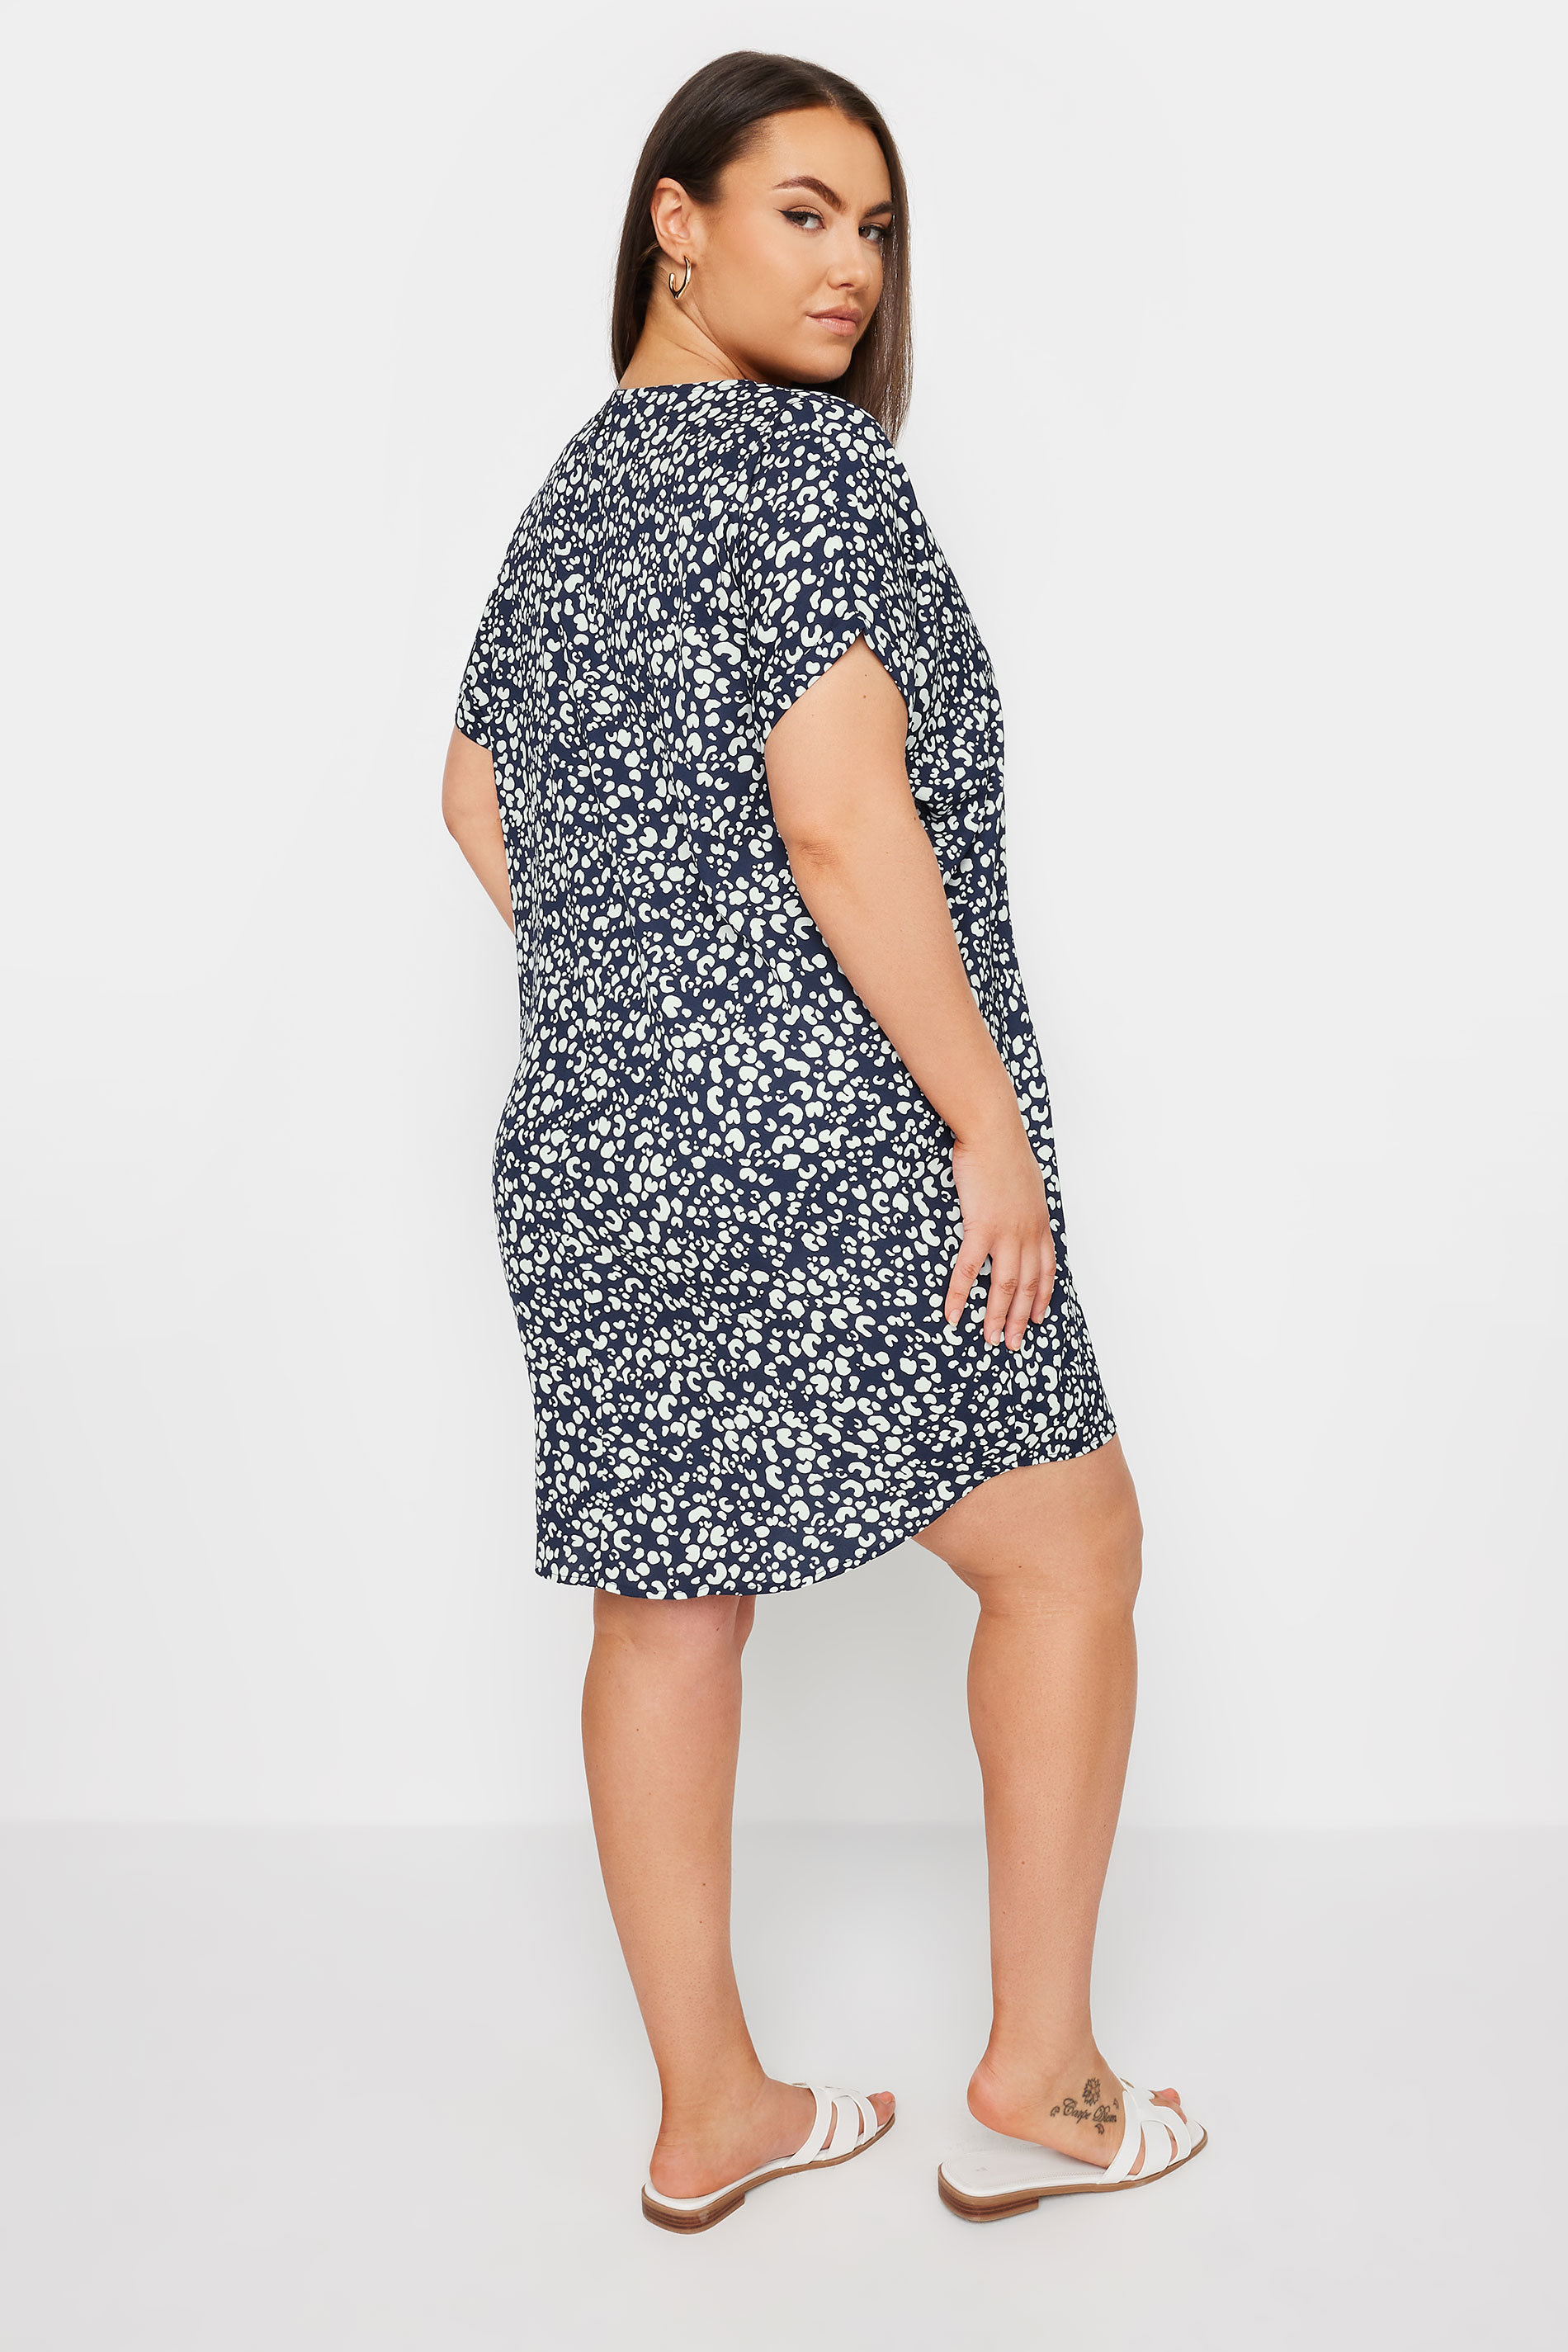 YOURS Plus Size Navy Blue Leopard Print Shift Dress | Yours Clothing 3